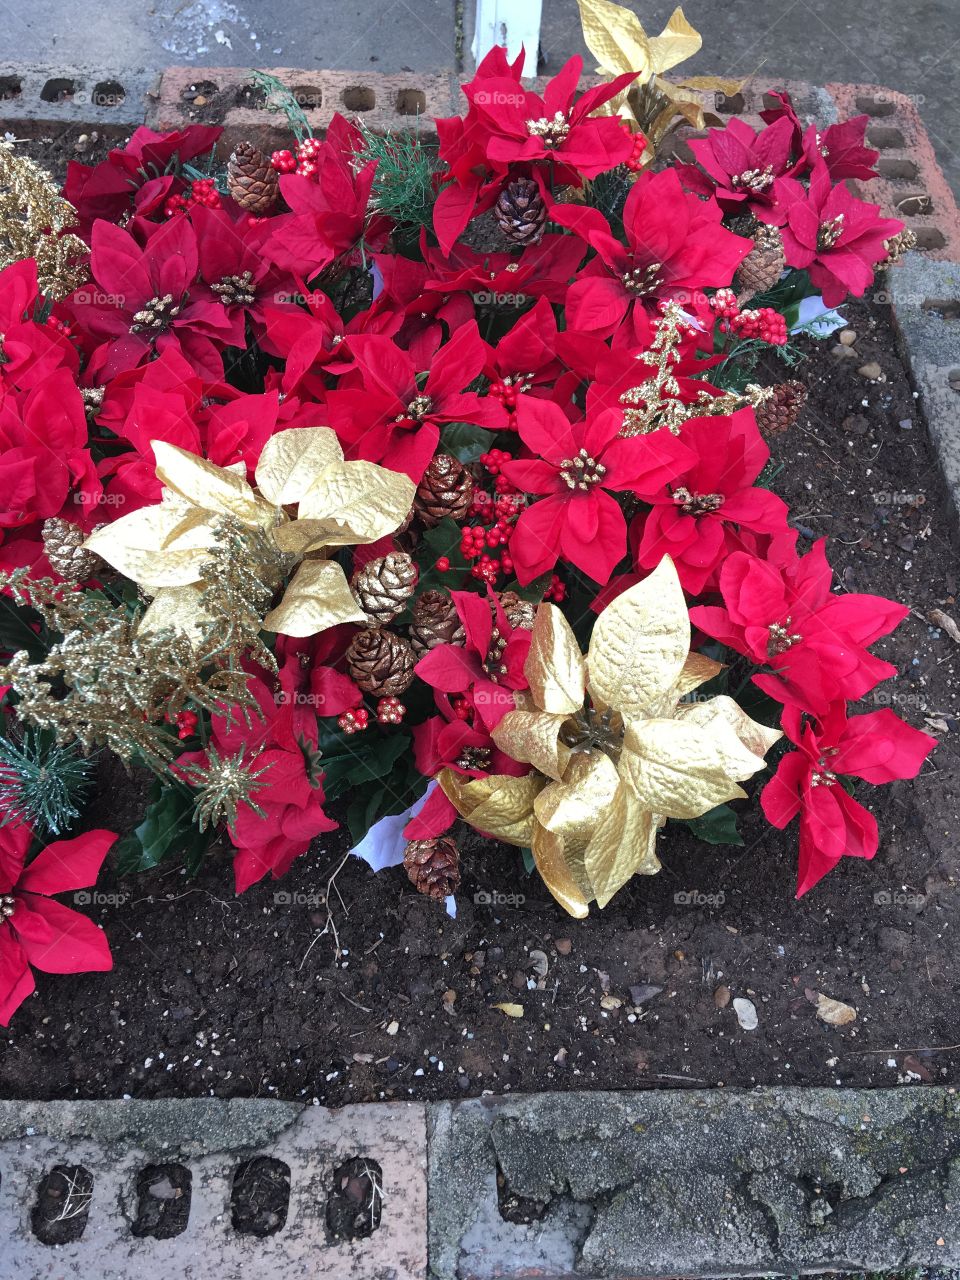 Someone has decorated the planters outside of the senior center! Looking a lot like Christmas!